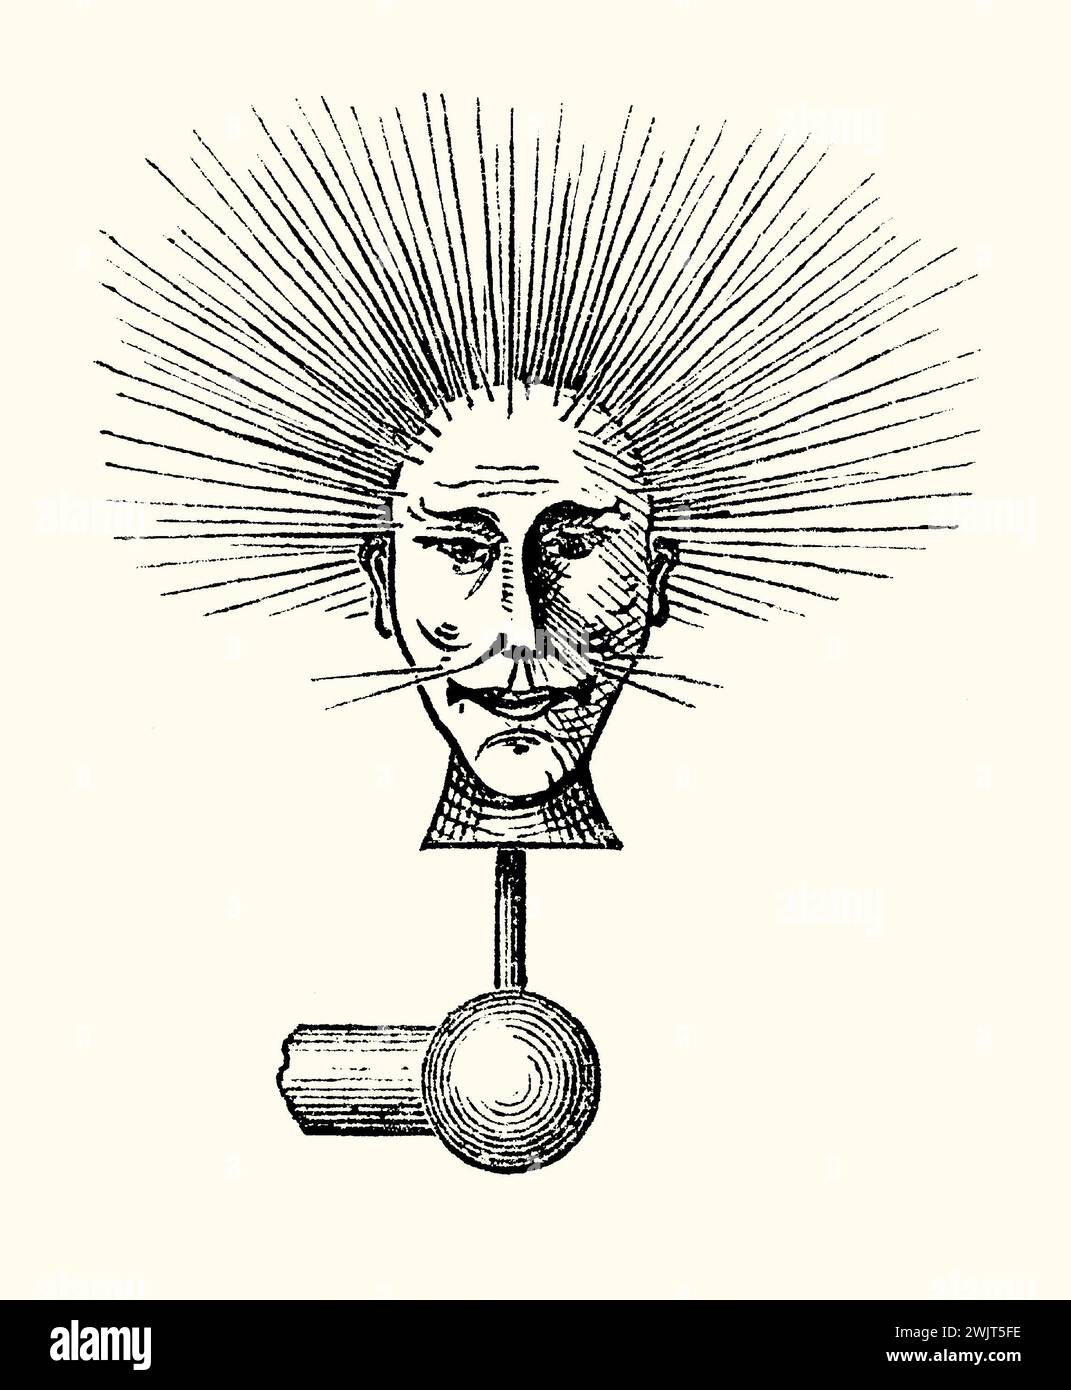 An old engraving showing an electrical ‘fright’ effect on a doll’s head from the 1800s. It is from Victorian book of the 1890s on sports, games and pastimes. By using a frictional electrical machine, an electrical current produced, conducted to the doll, will make the fake hair on its head stand on end. Stock Photo